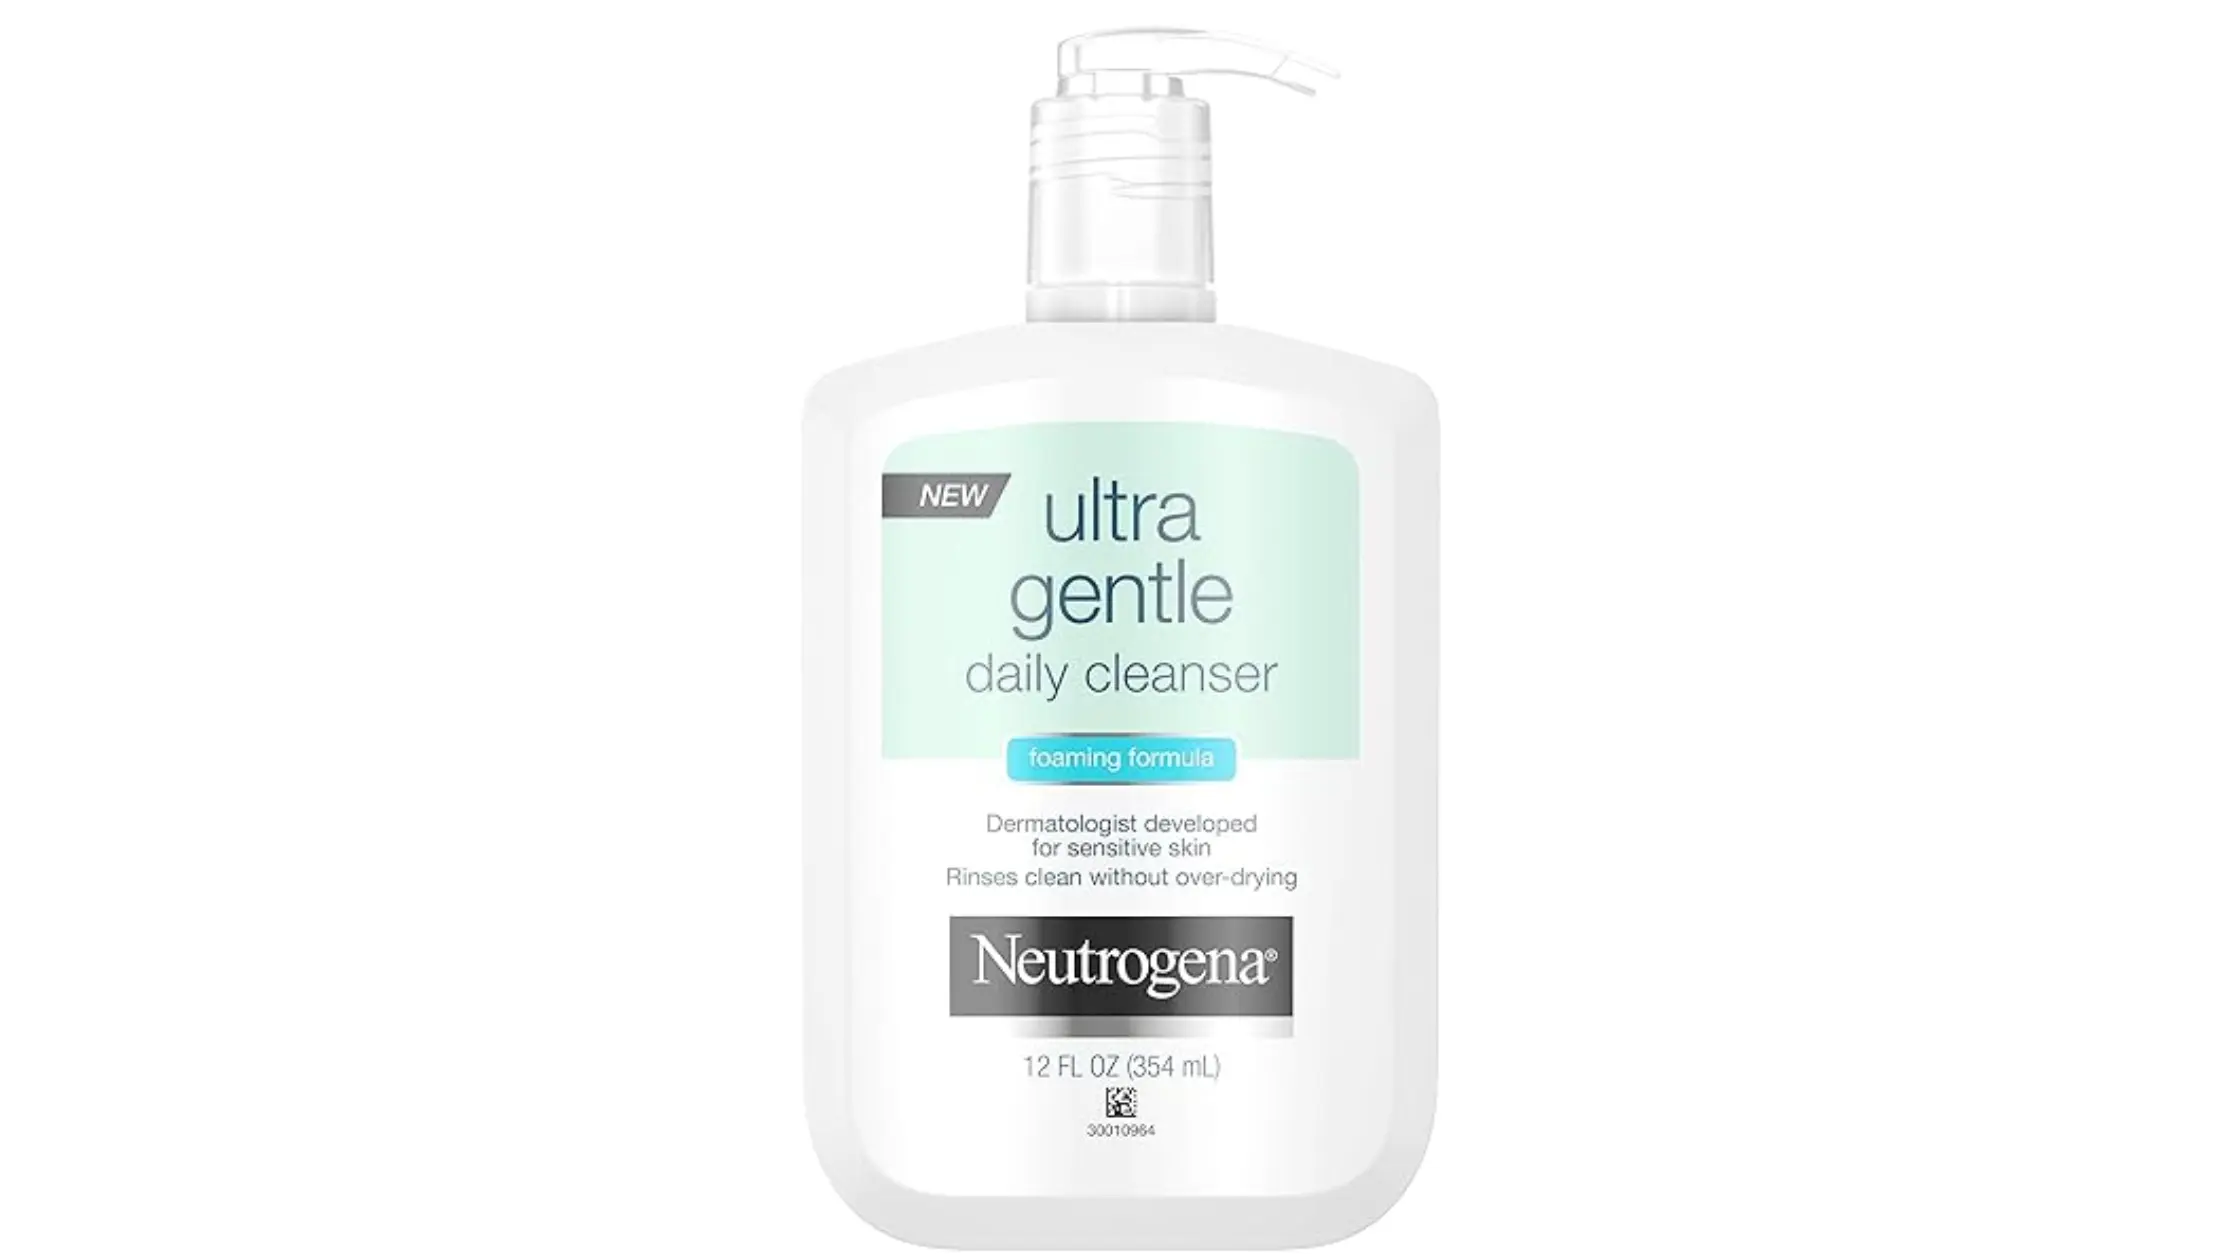 Neutrogena Ultra Gentle Daily Cleanser Review